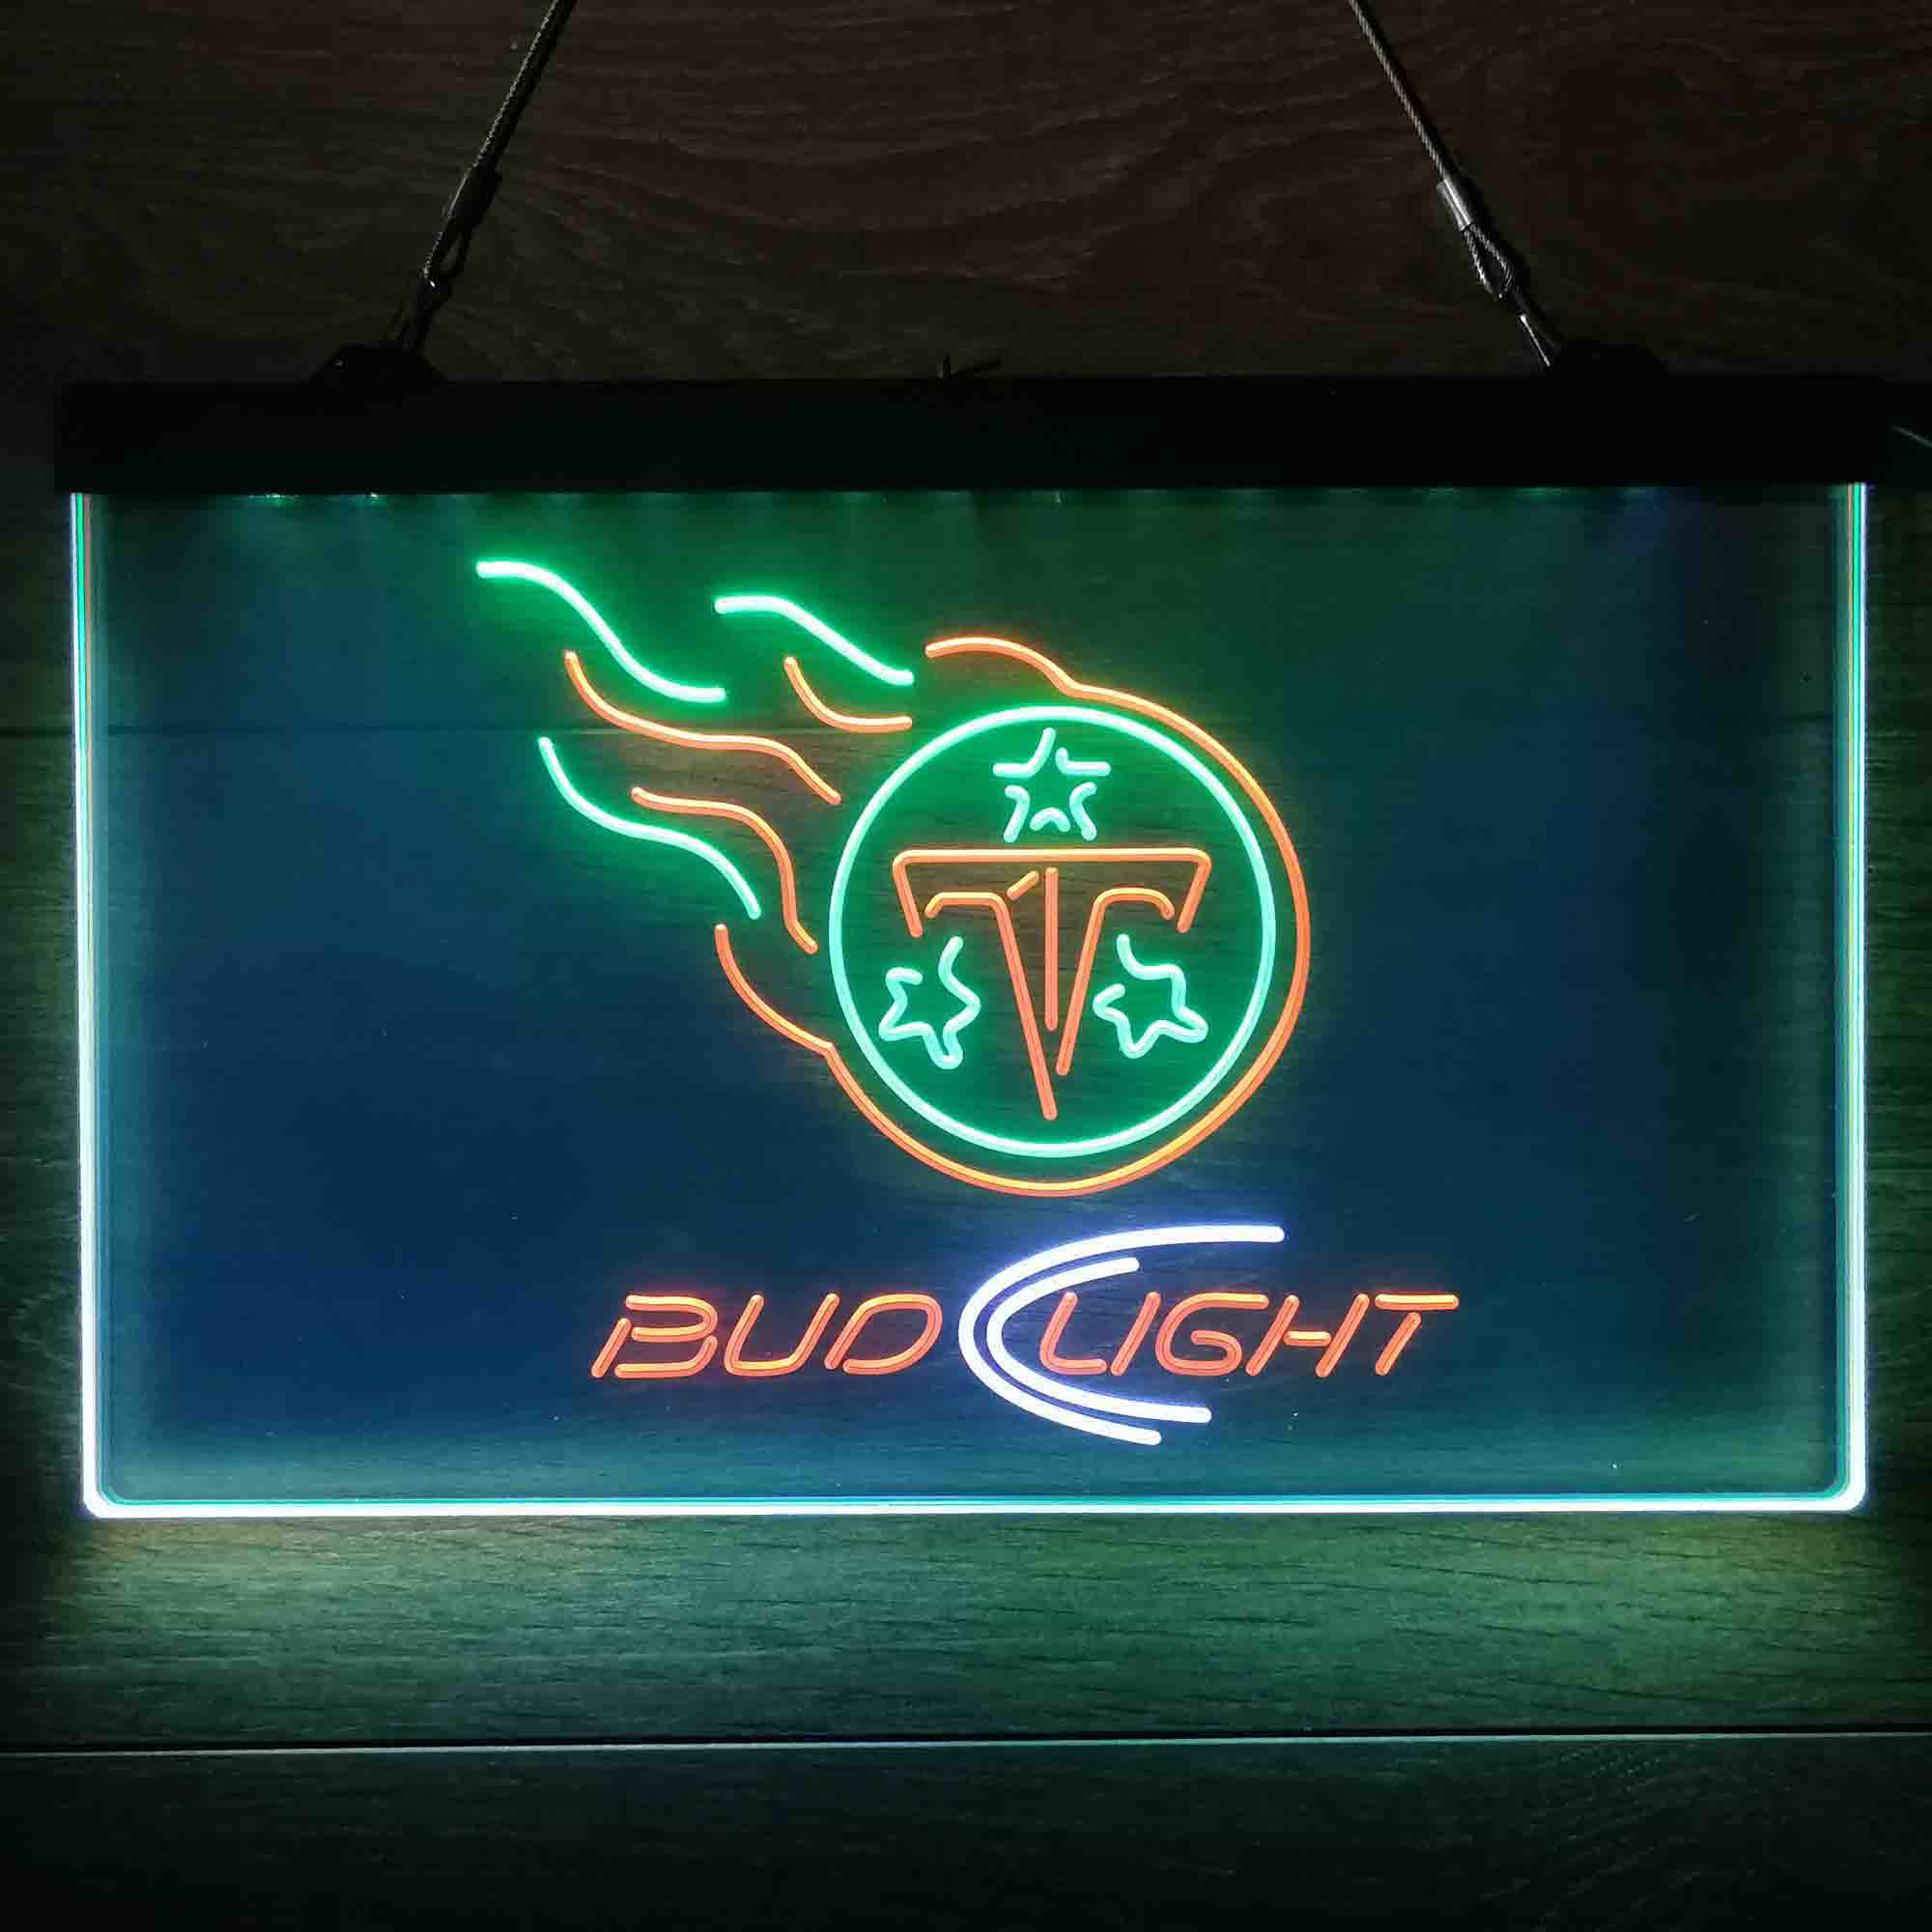 Red Tennessee Titans Bud Light Neon-Like LED Sign